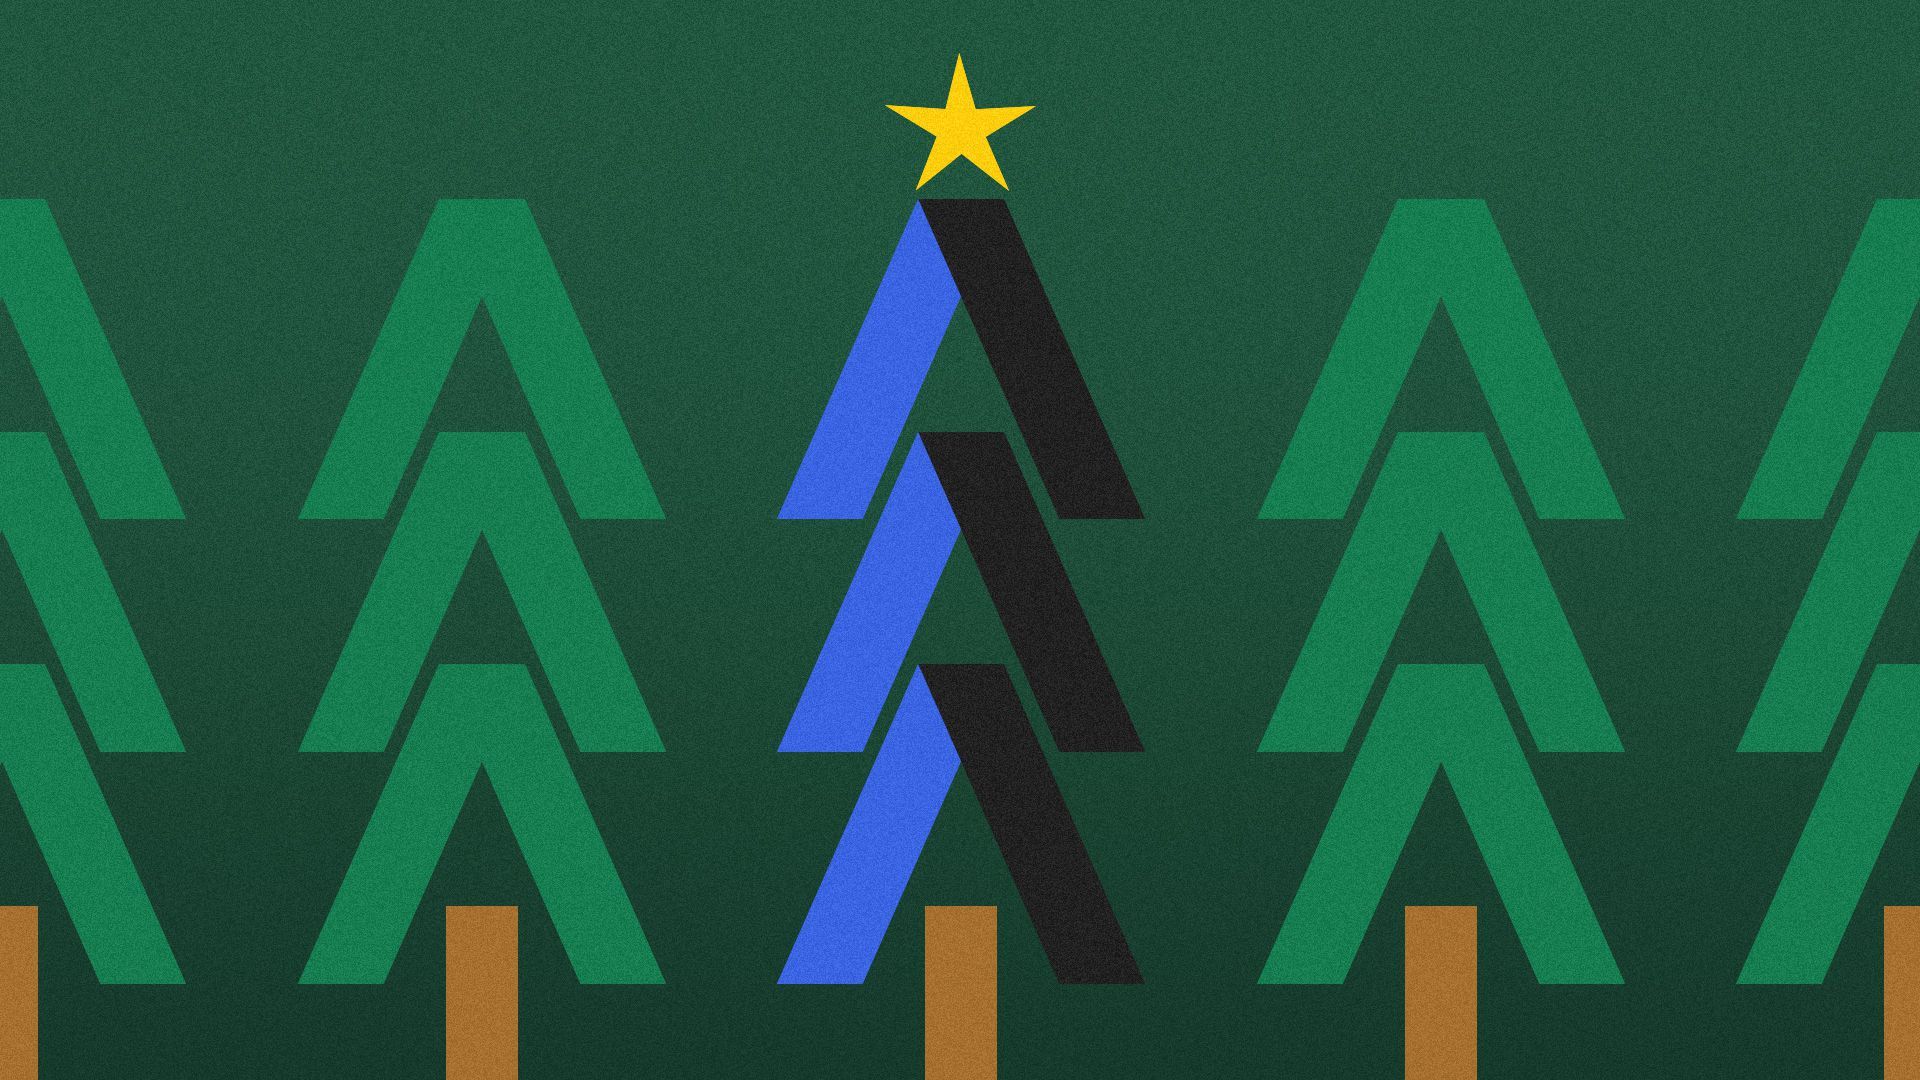 Illustration of Christmas trees formed from Axios logos.